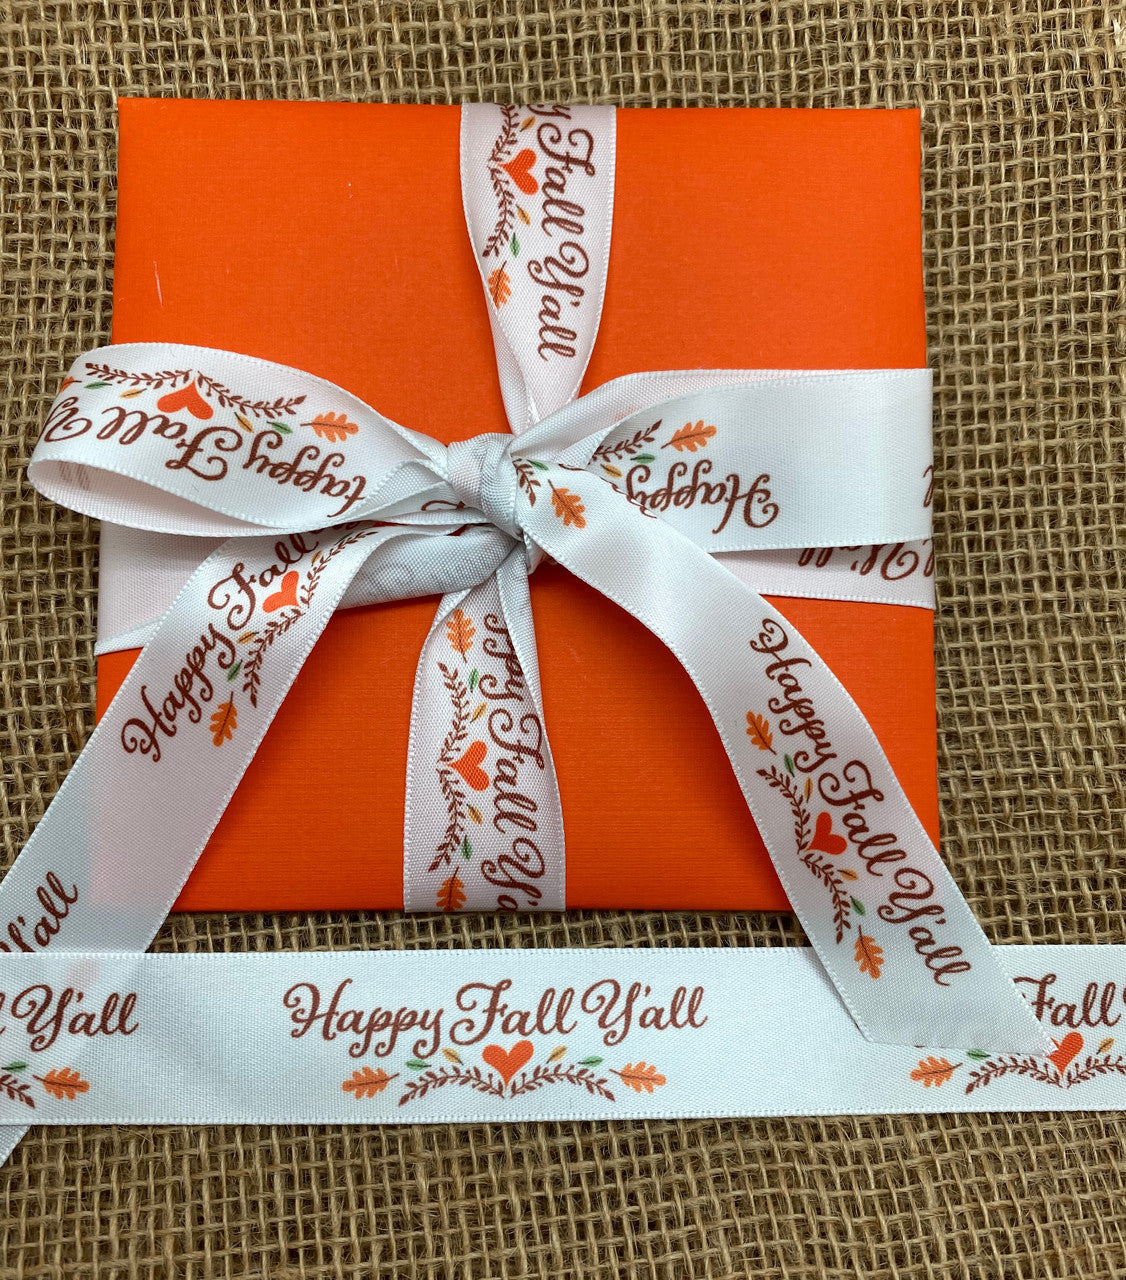 Tie our Happy Fall Ya'll on a package of Fall treats of a Fall gift to create a truly special Autumn themed present!